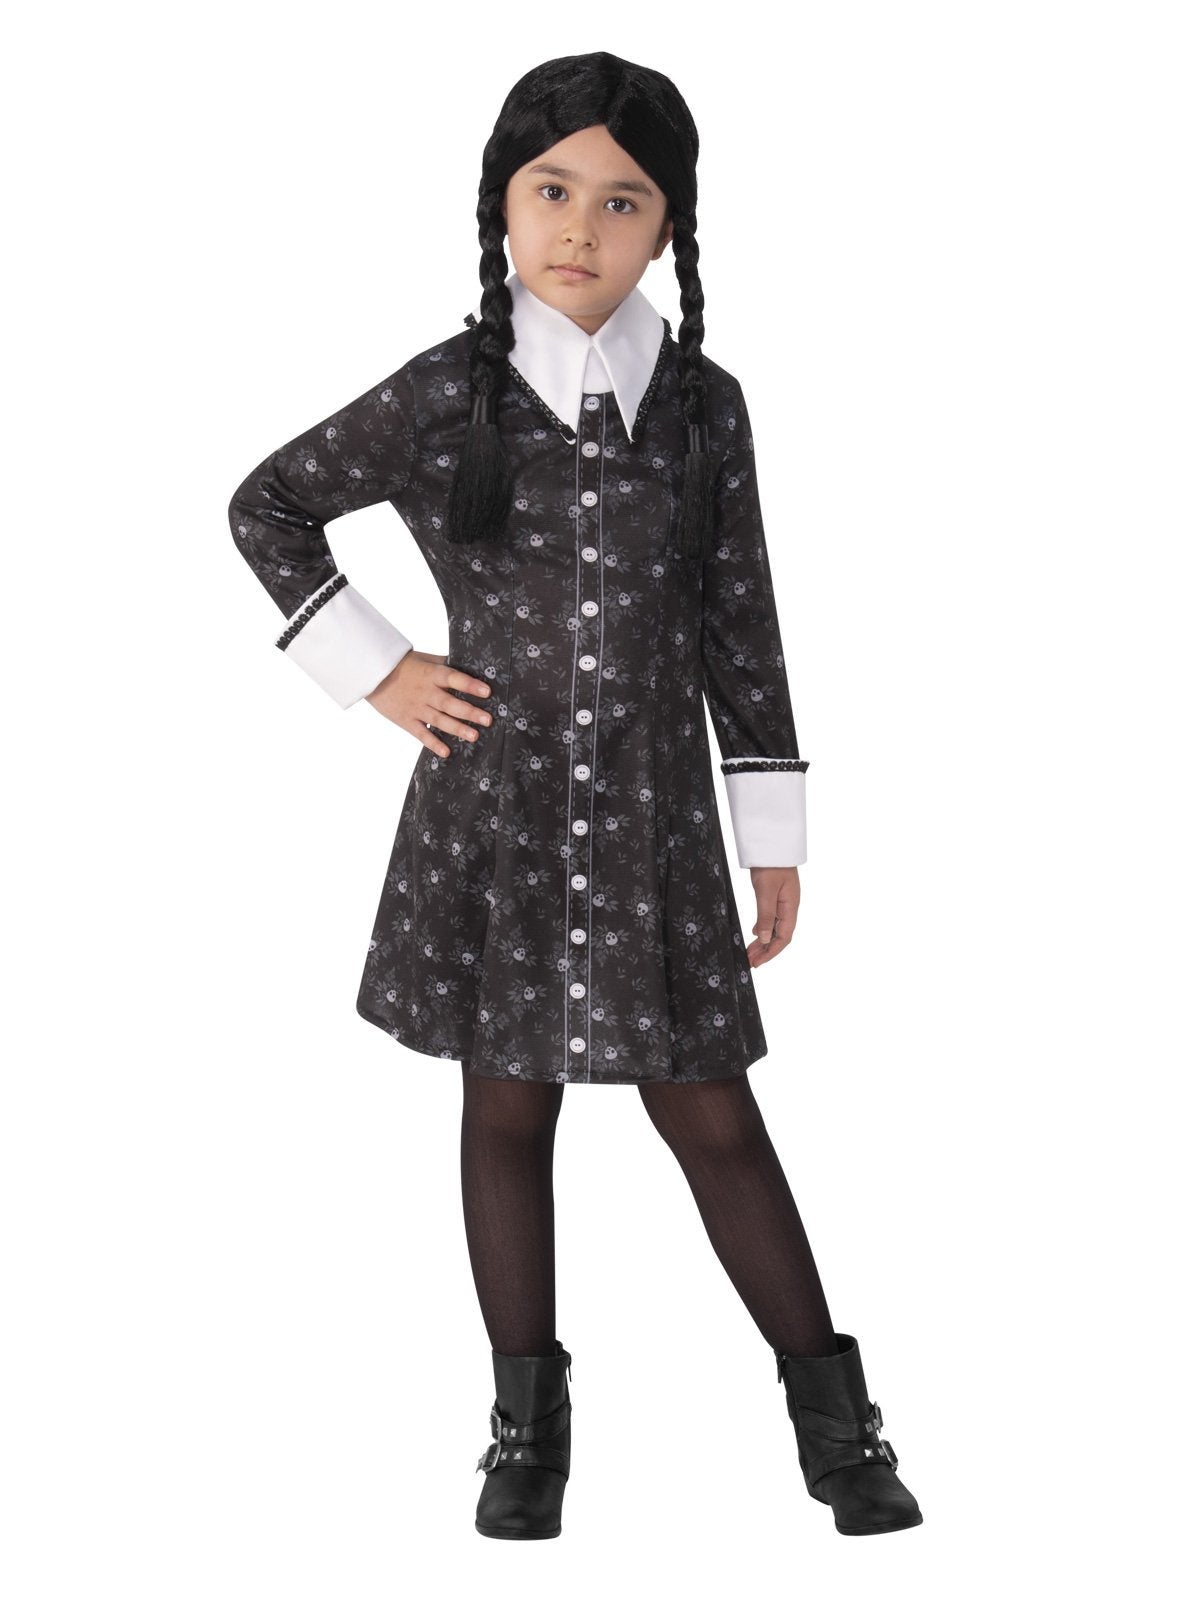 Wednesday Addams Costume for Kids - The Addams Family